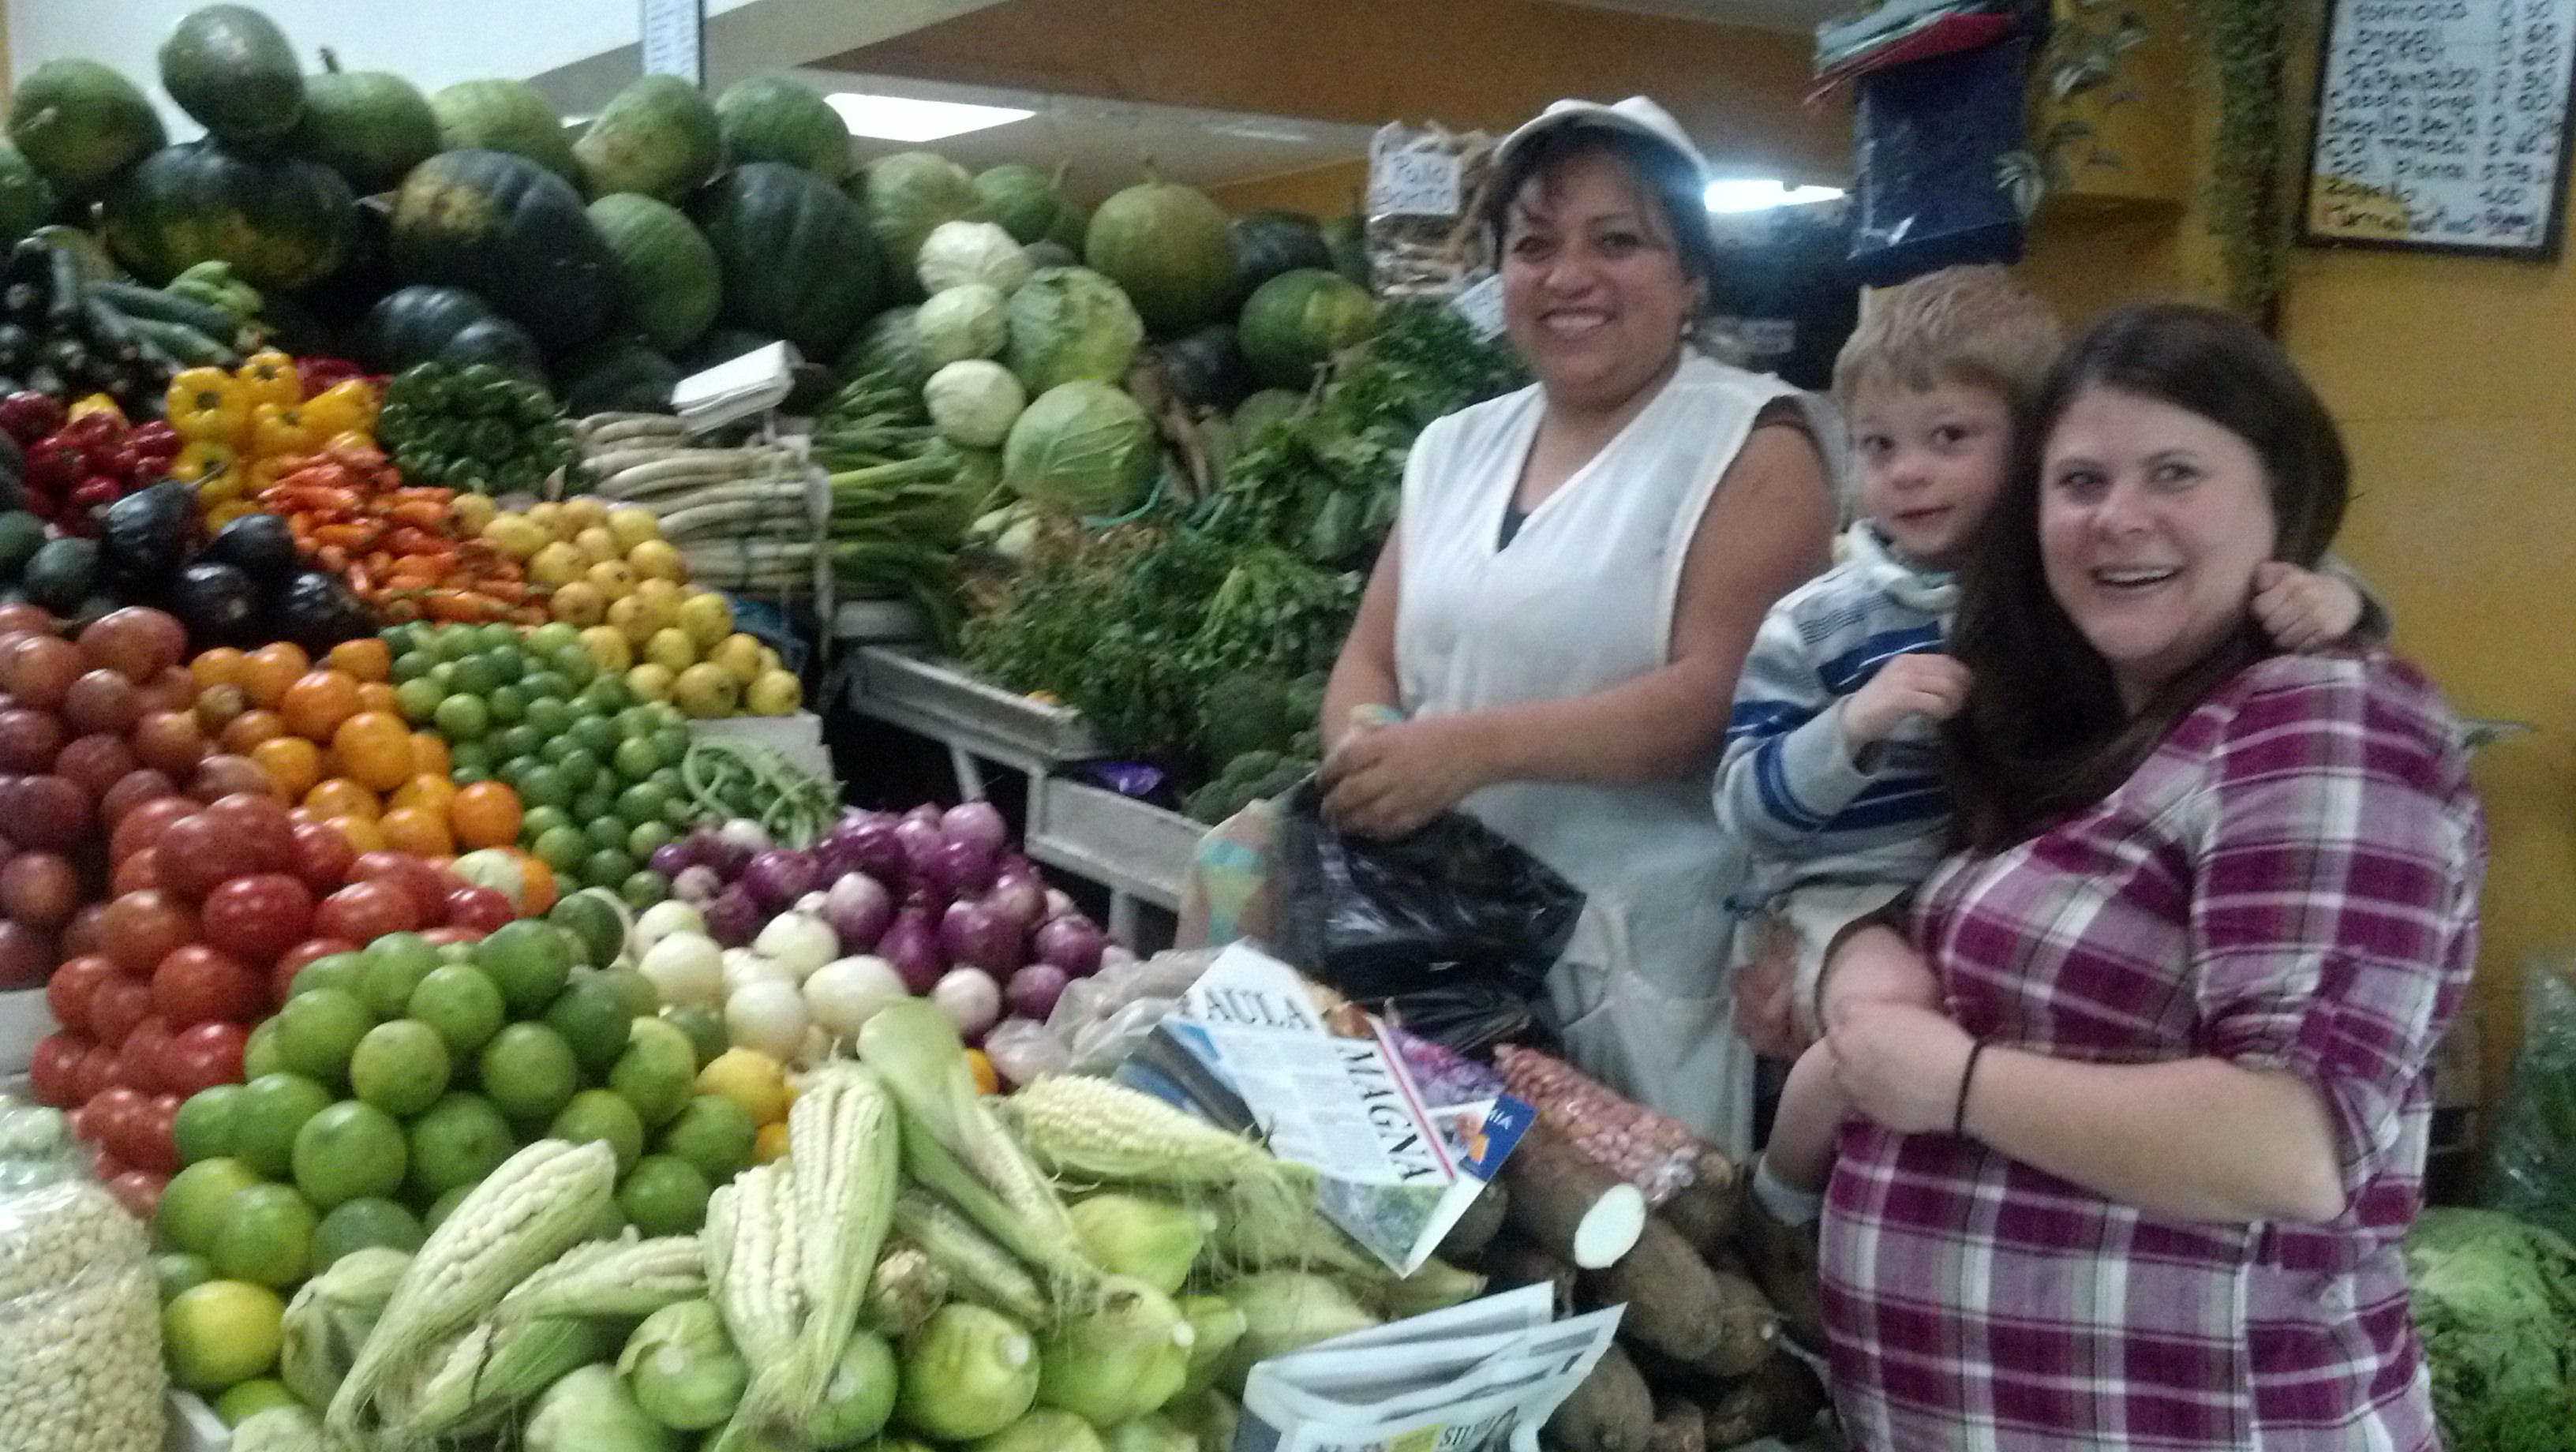 Us at the market with our favorite vegetable lady!  She's so nice!